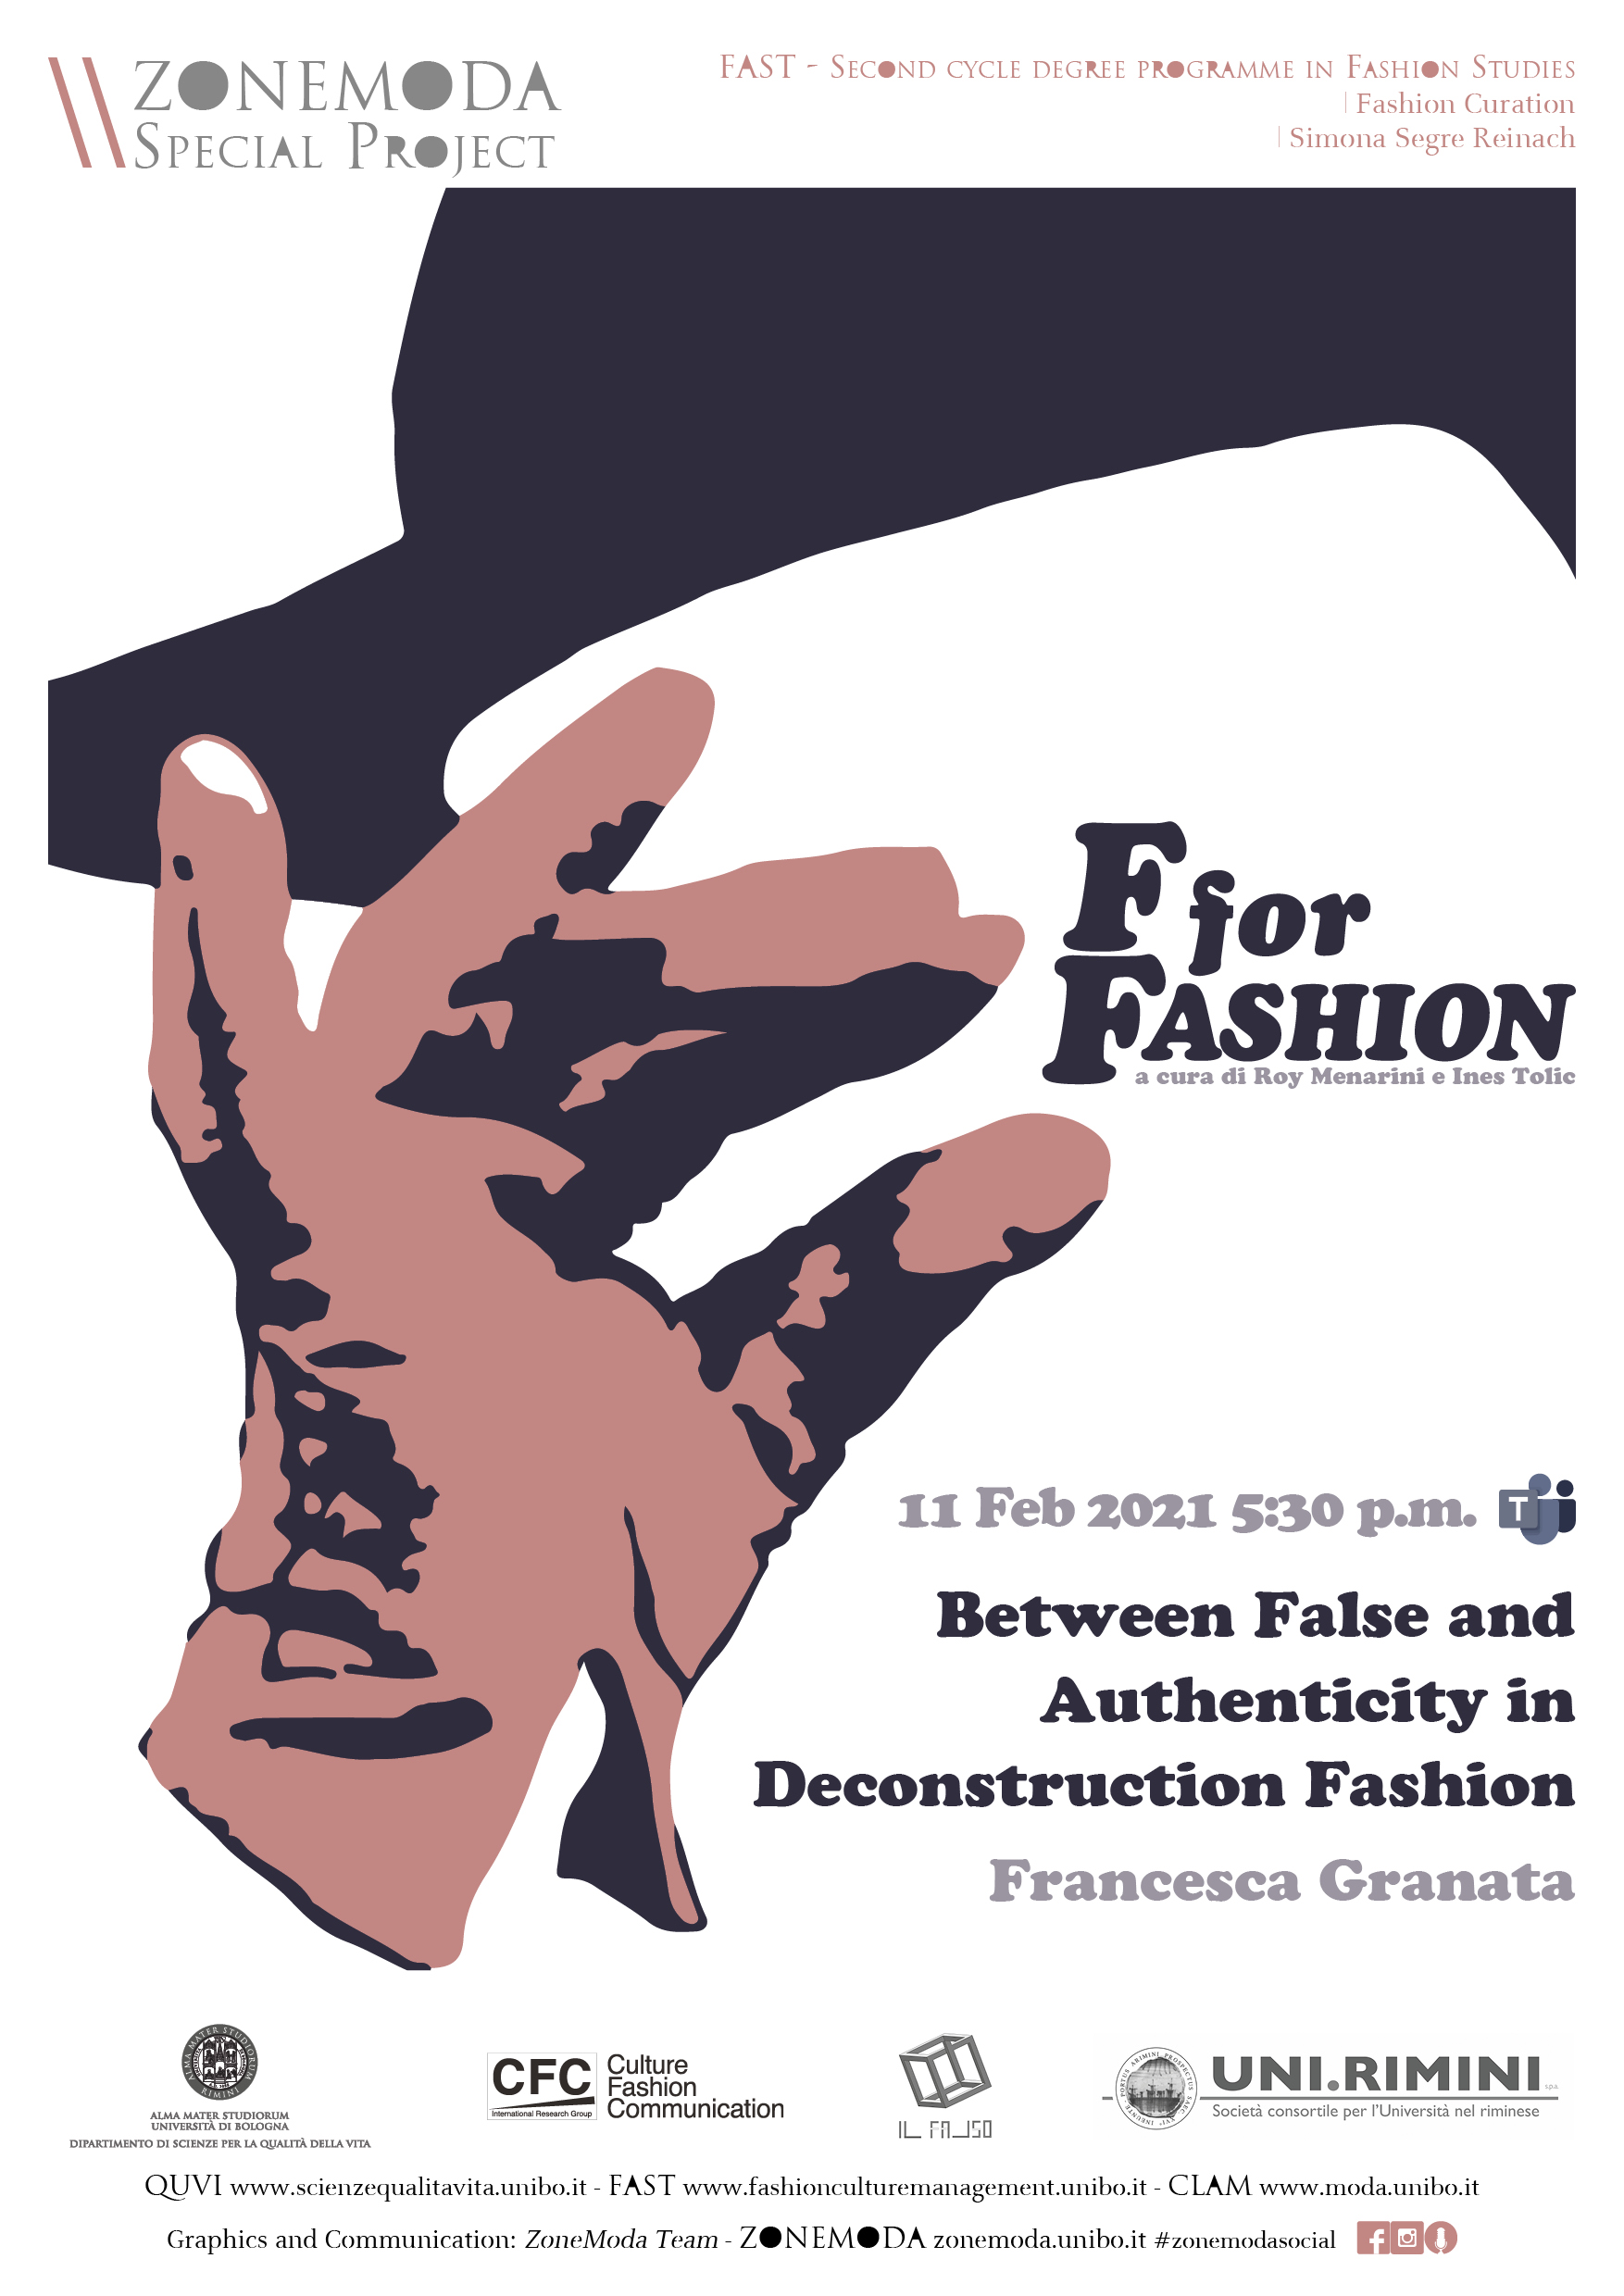 F for Fashion Between False and Authenticity in Deconstruction Fashion